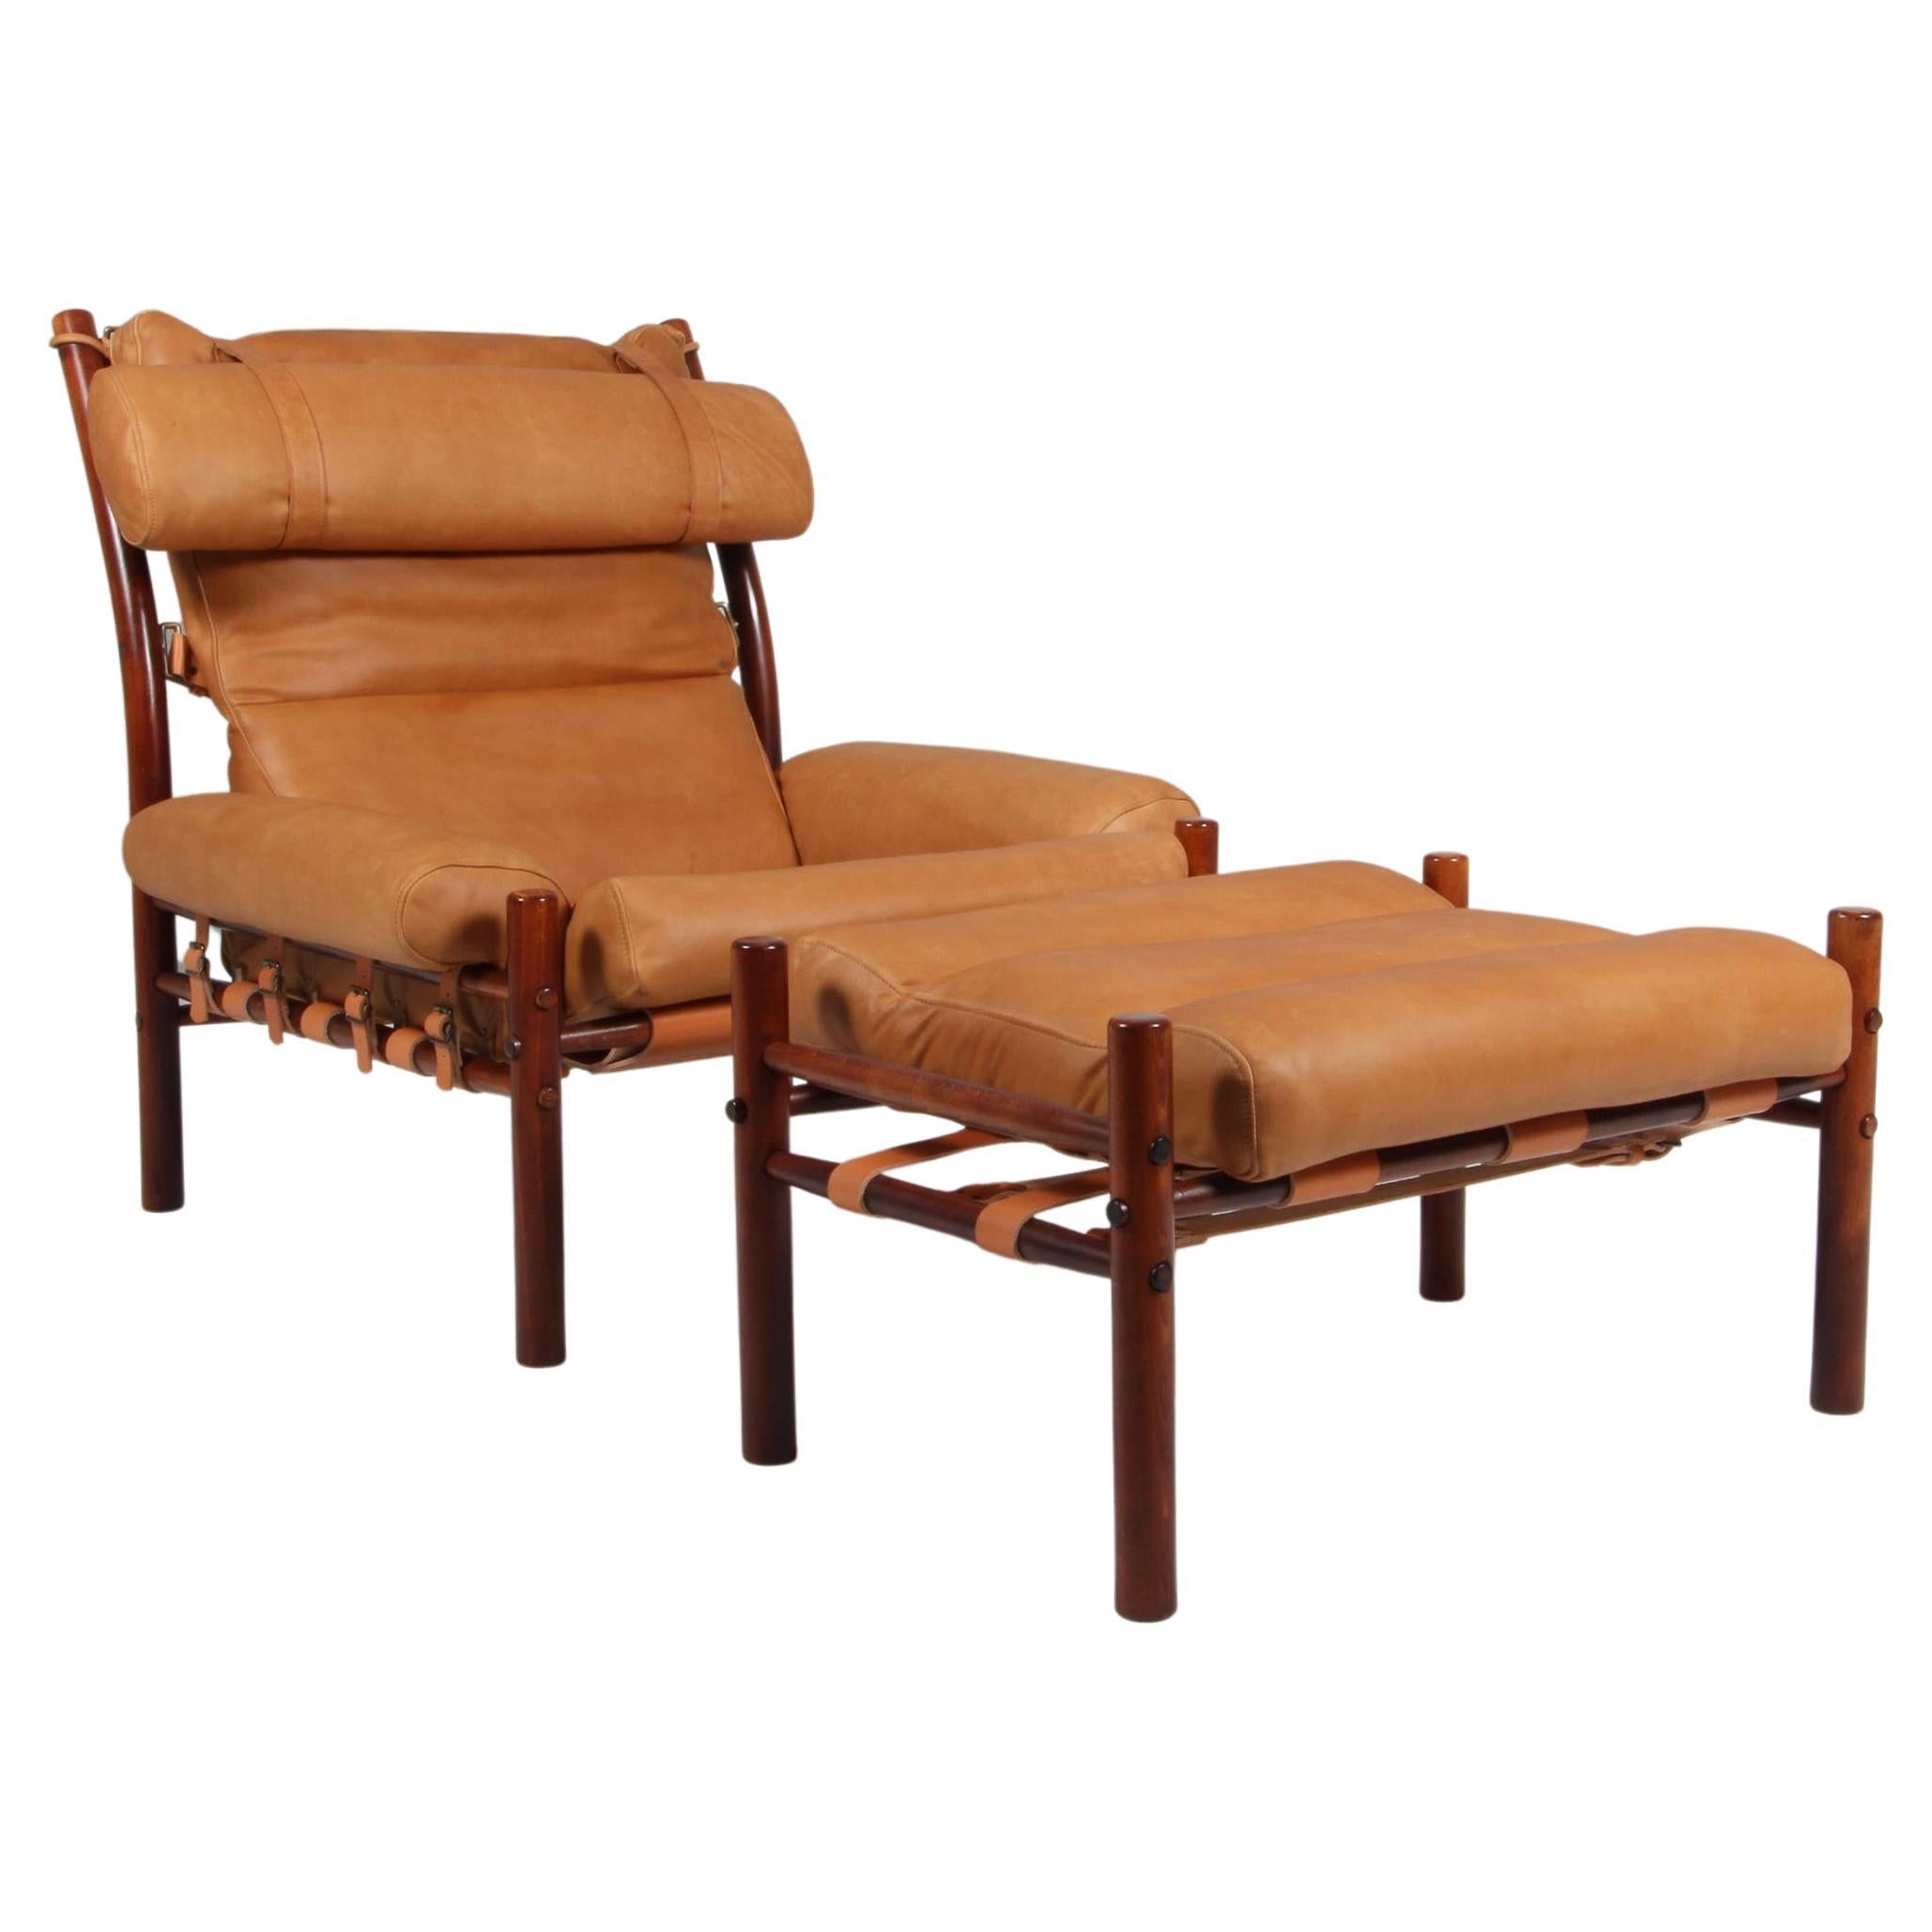 Arne Norell 'Inca' Lounge Chair with Ottoman in new full grain leather